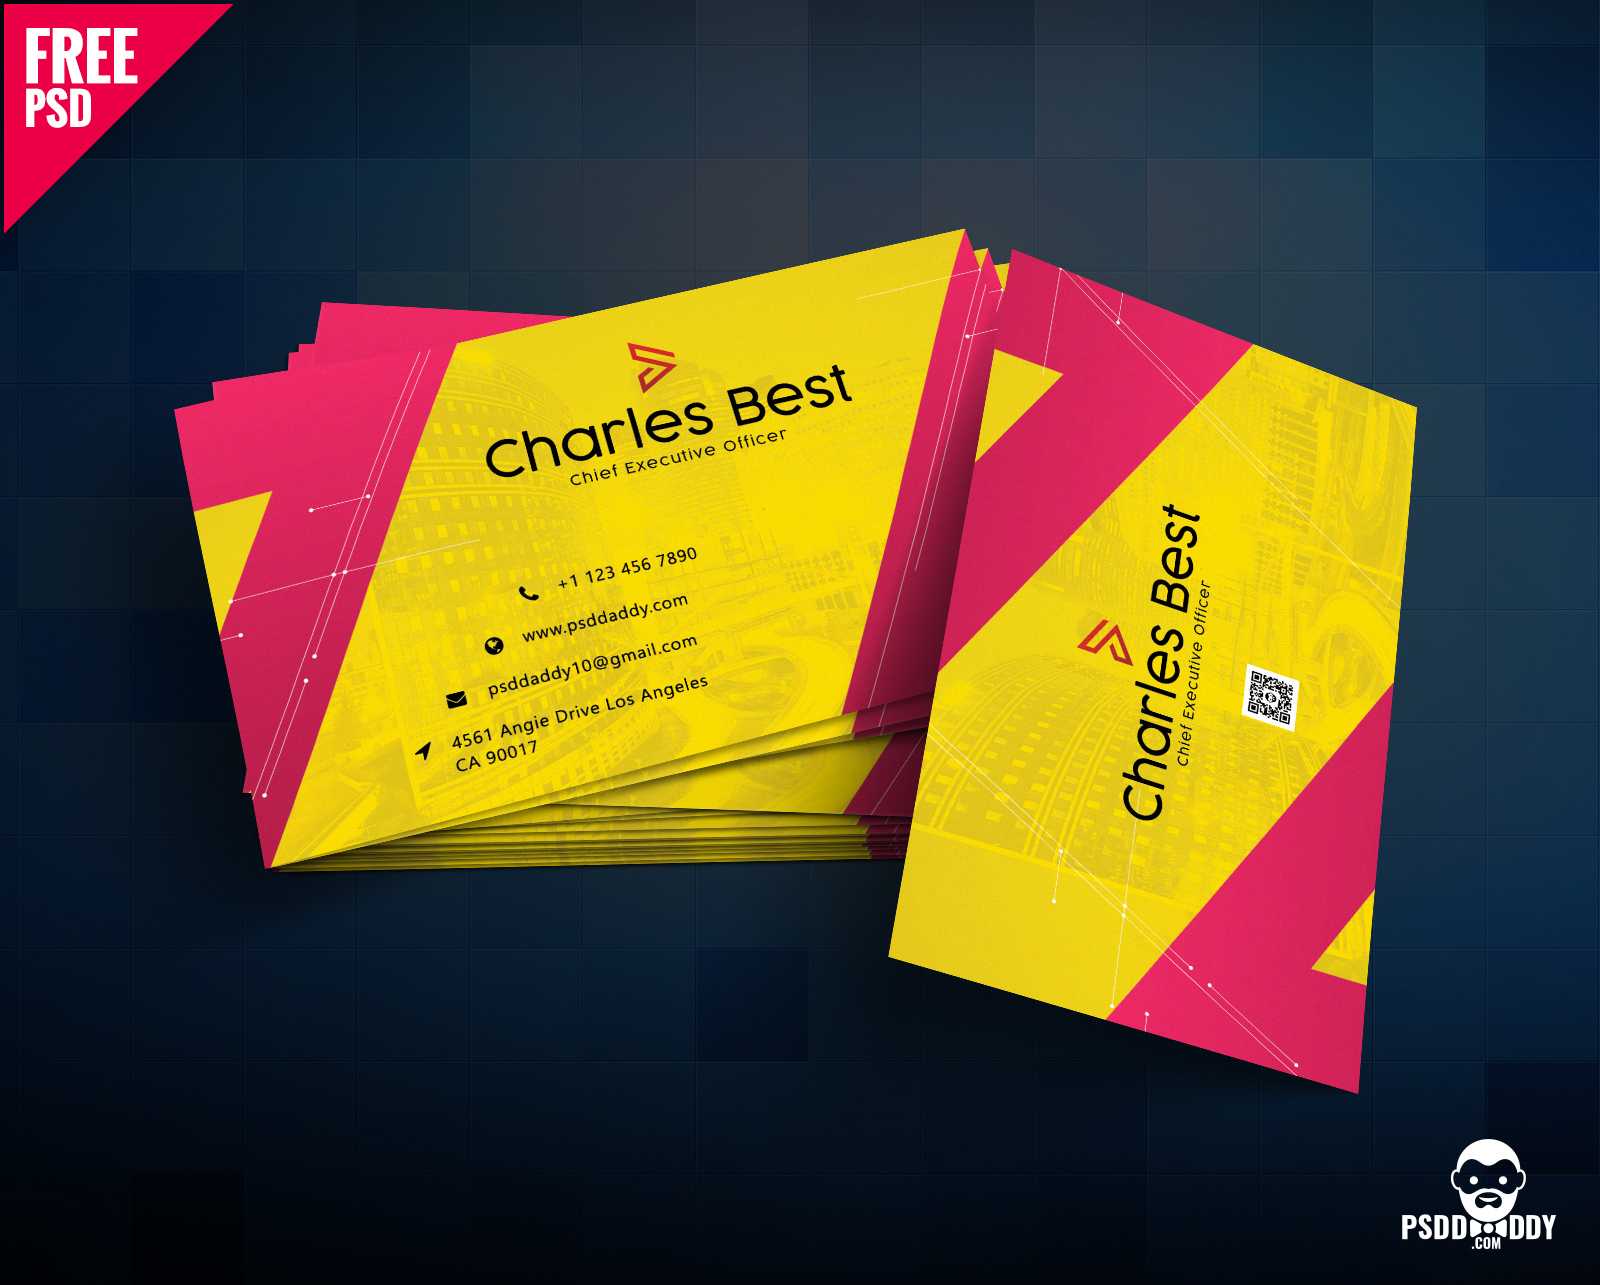 Download] Creative Business Card Free Psd | Psddaddy Regarding Visiting Card Psd Template Free Download